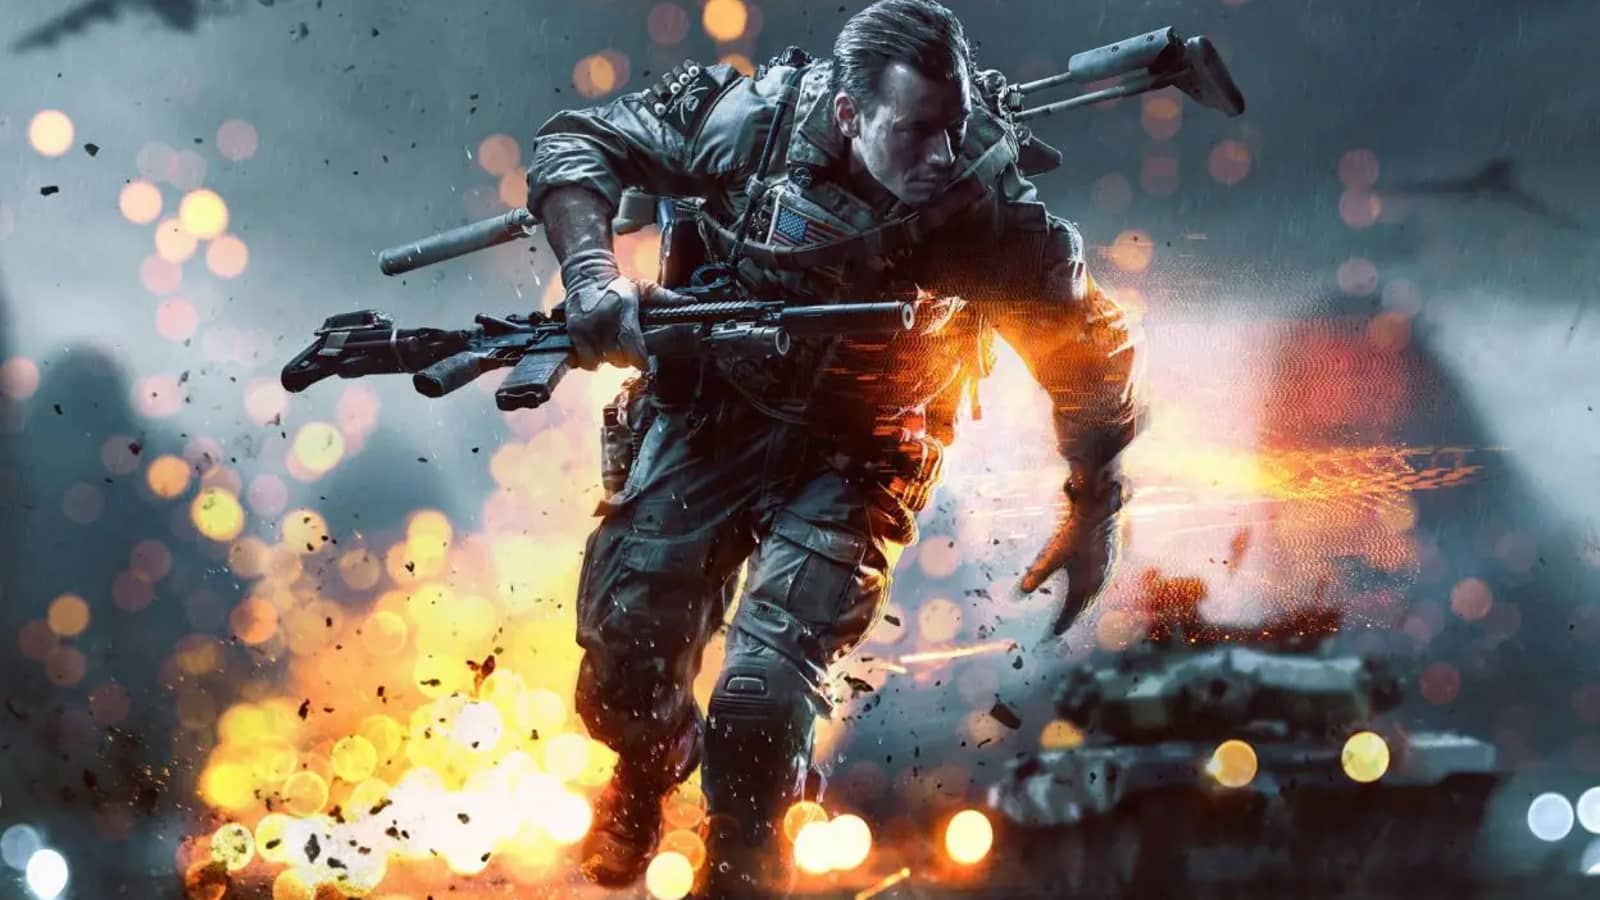 Battlefield 4 Player Count And Statistics 2023 - How Many People